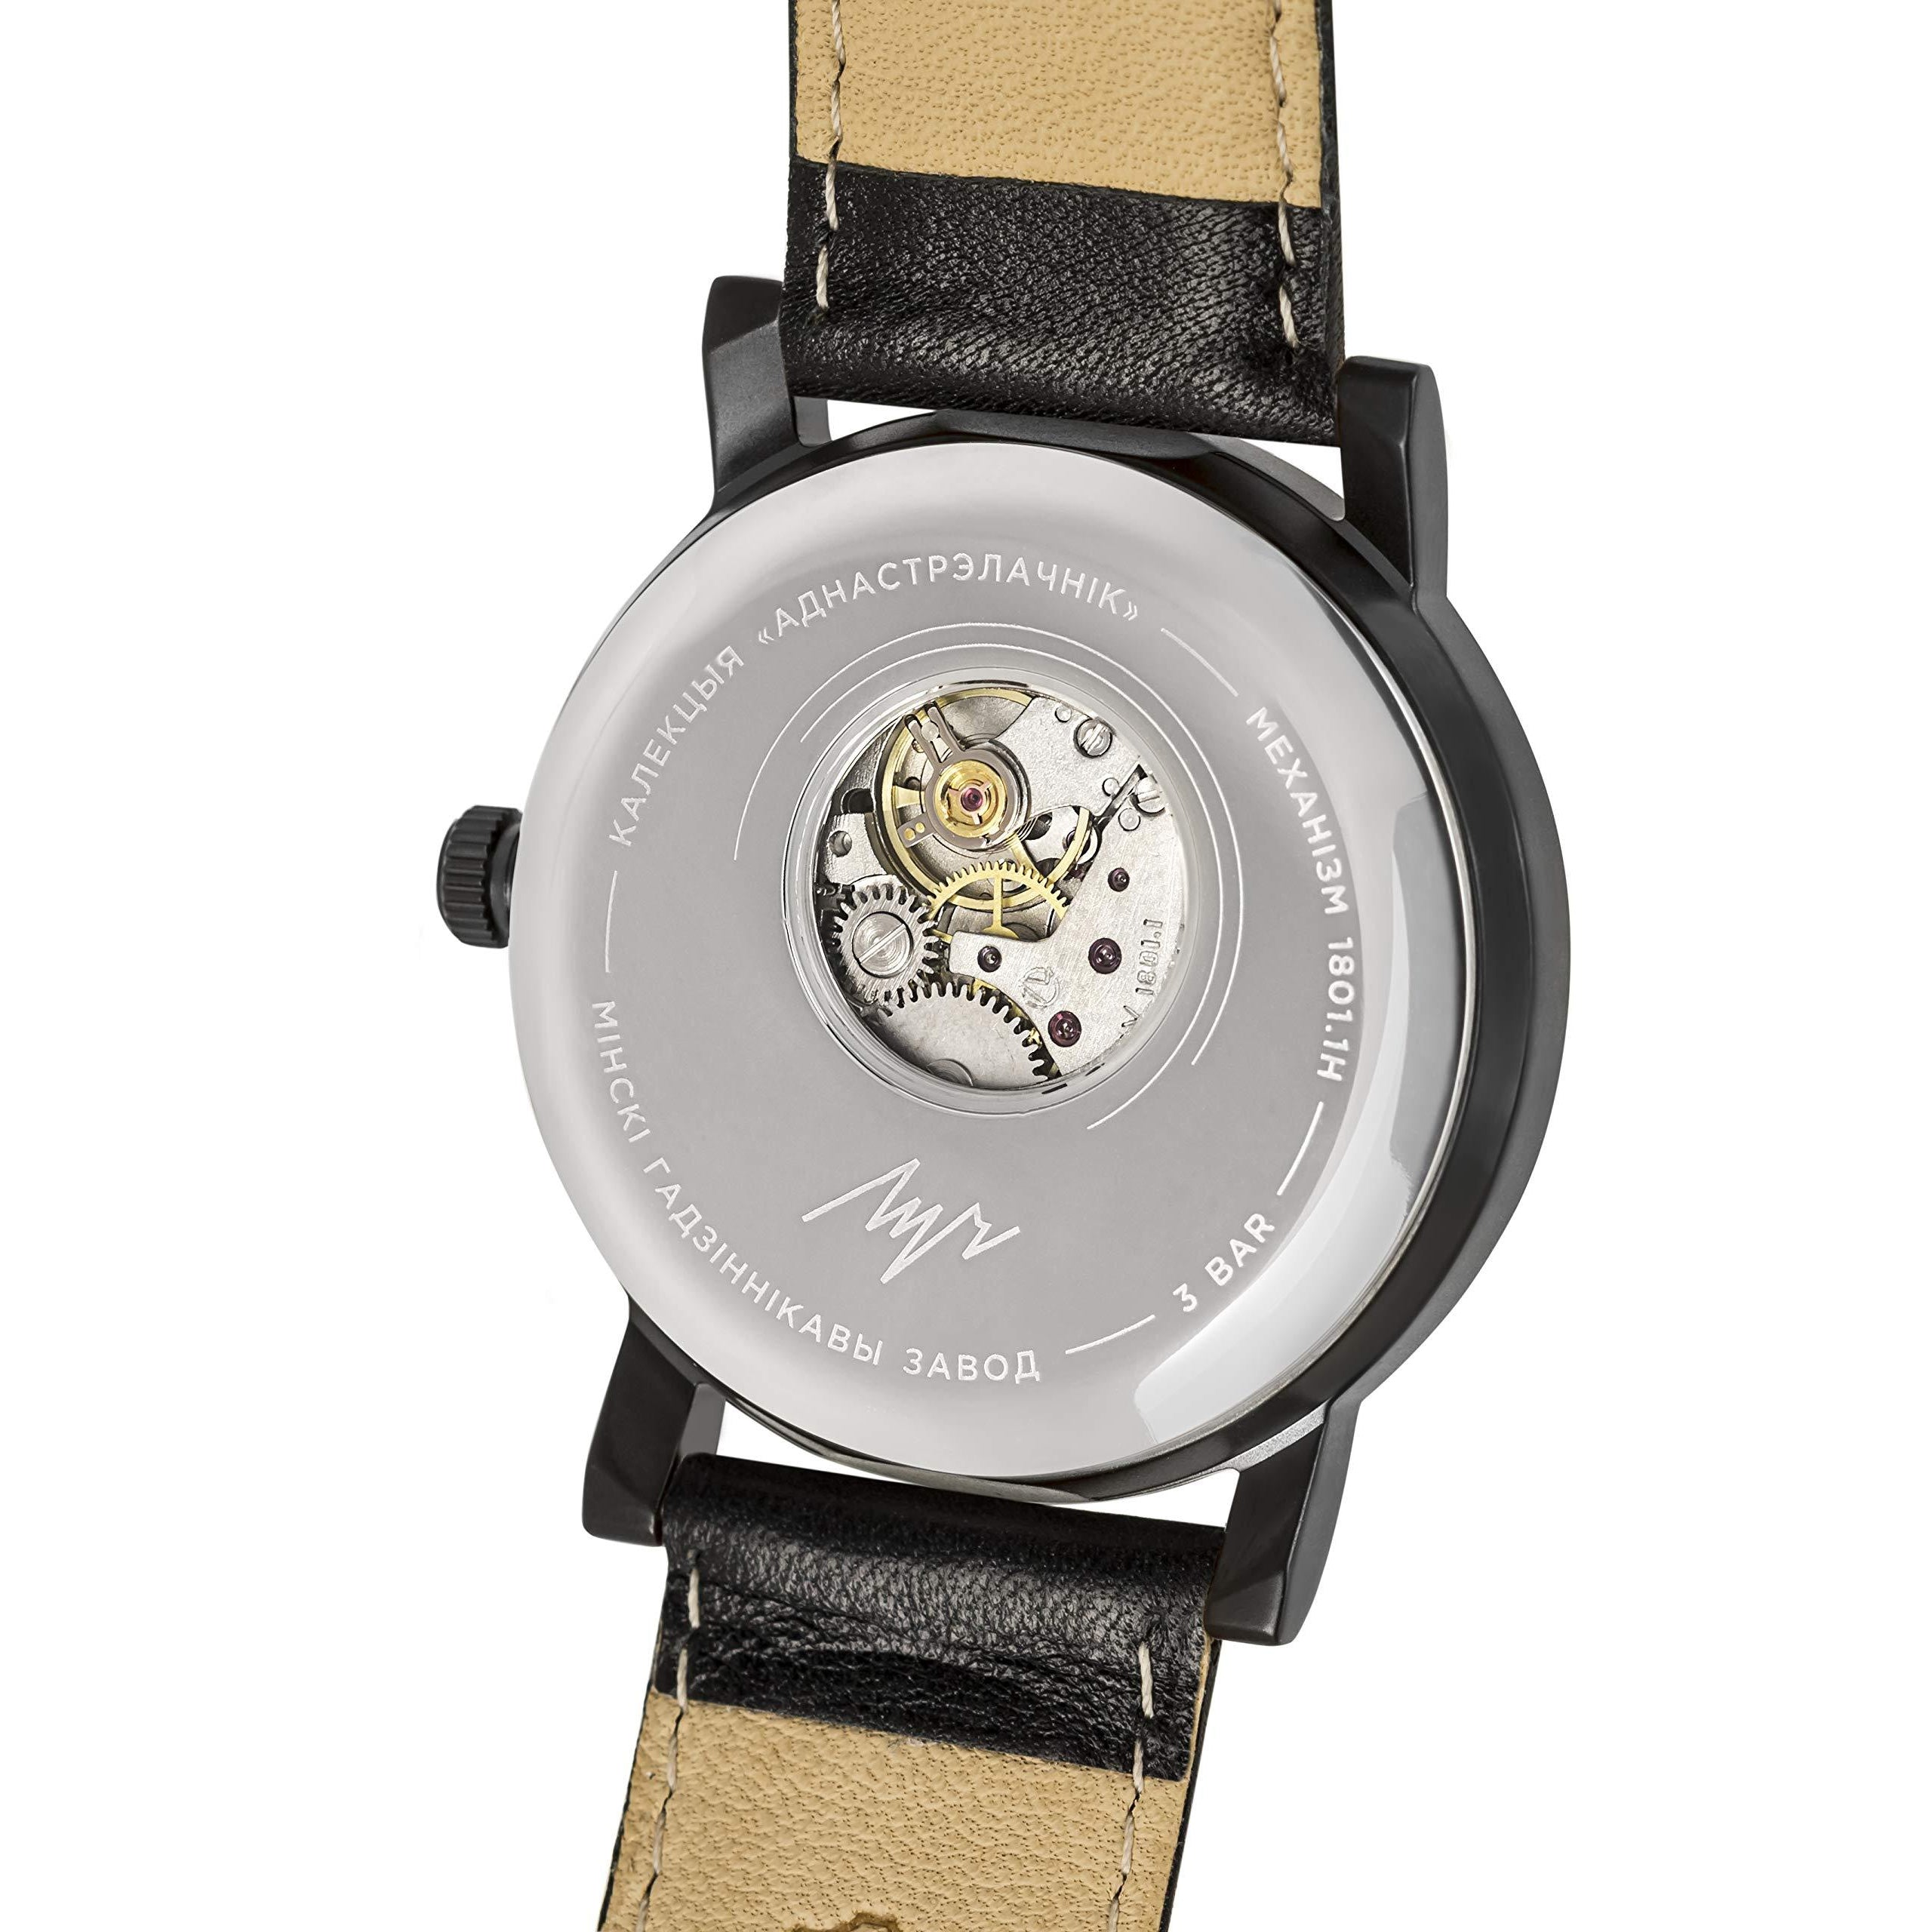 Luch Handwinding One-Handed Watch with Sapphire Crystal - 71957784